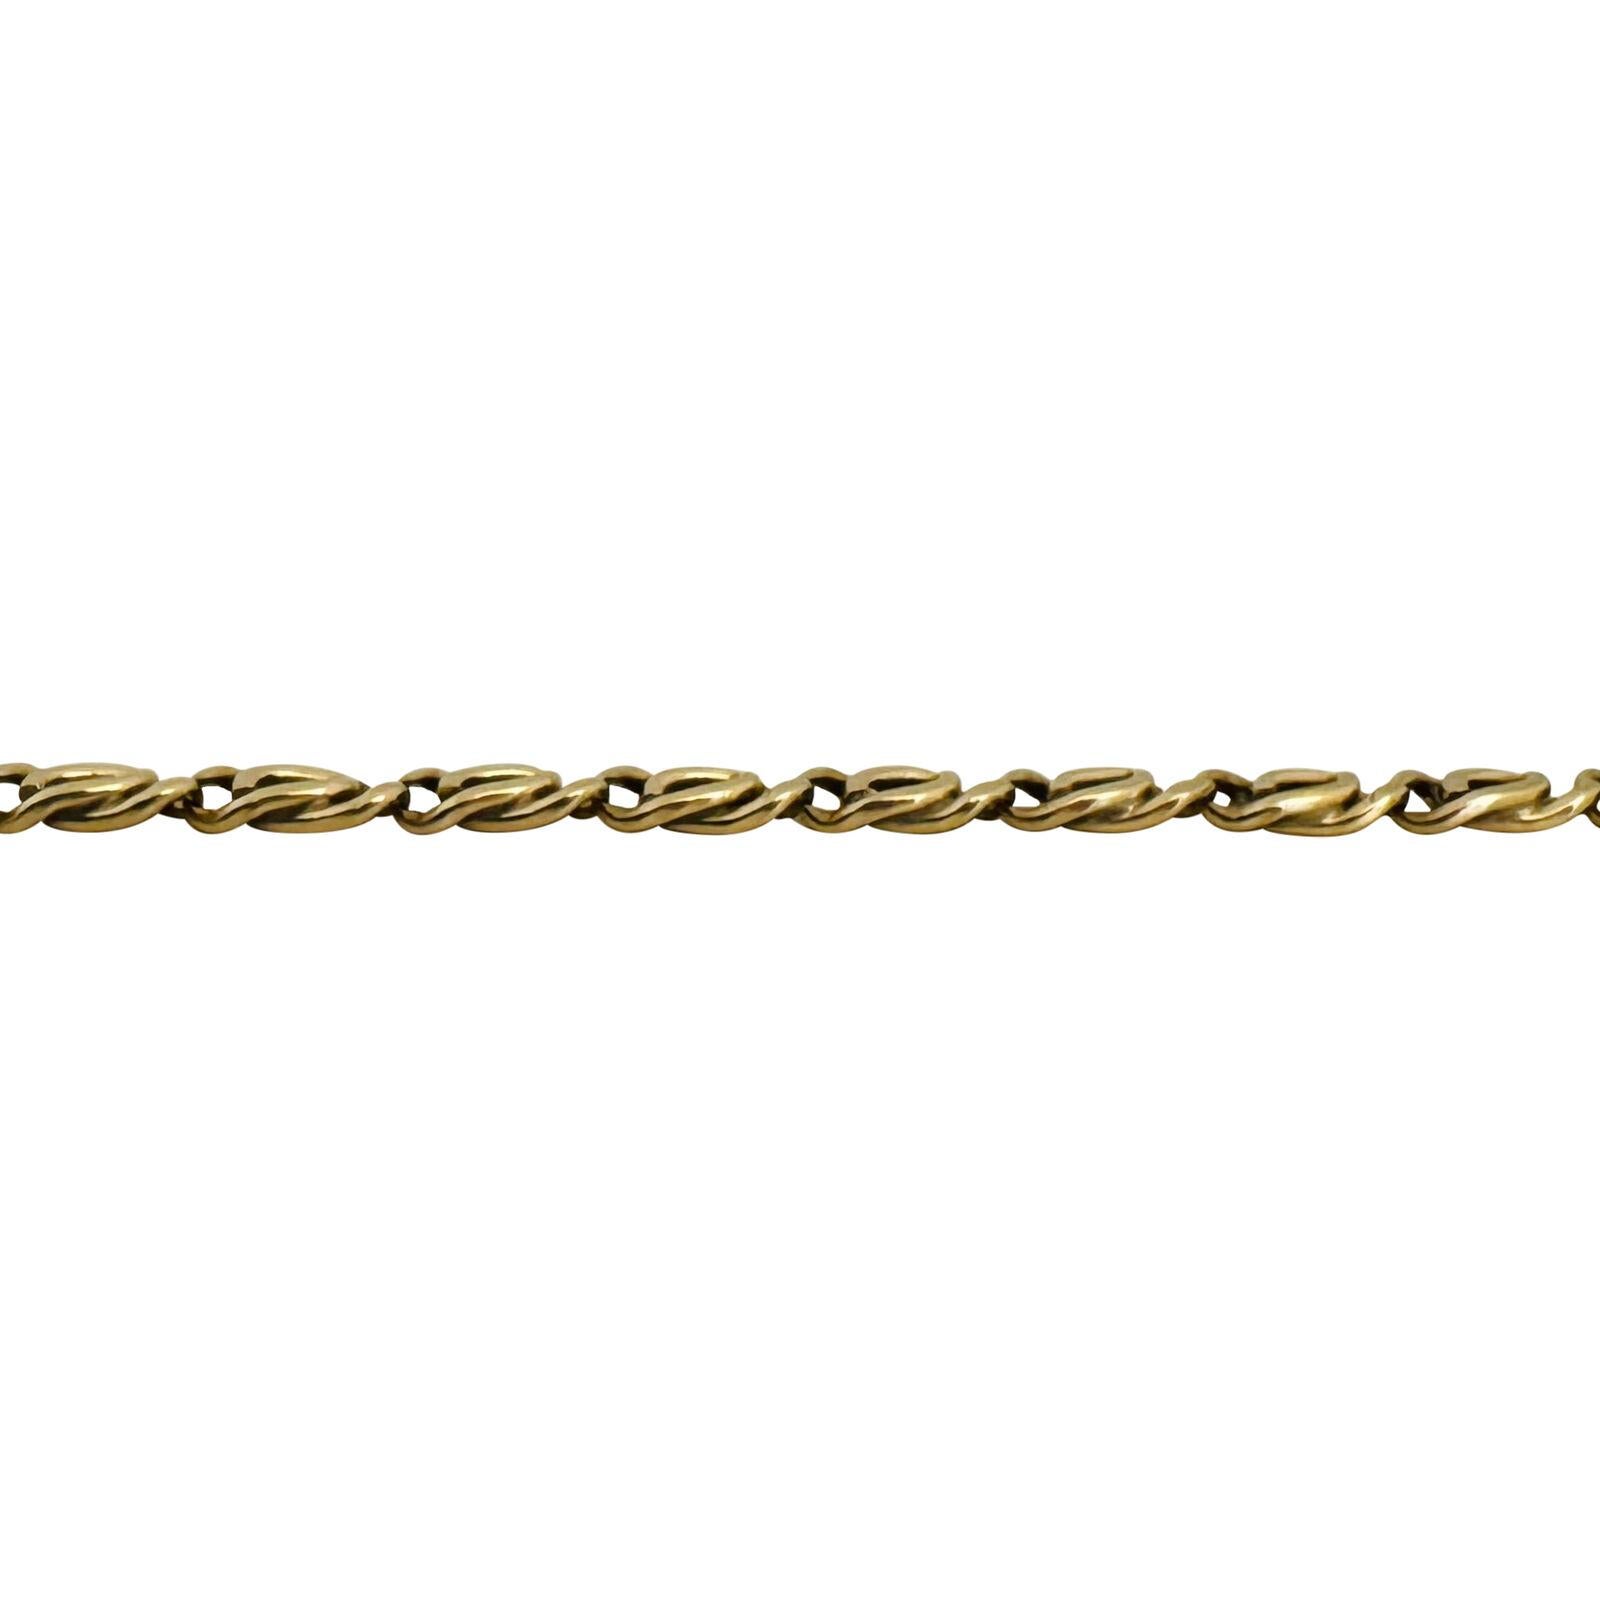 Women's or Men's 14 Karat Yellow Gold Solid Fancy Curb Link Chain Necklace 